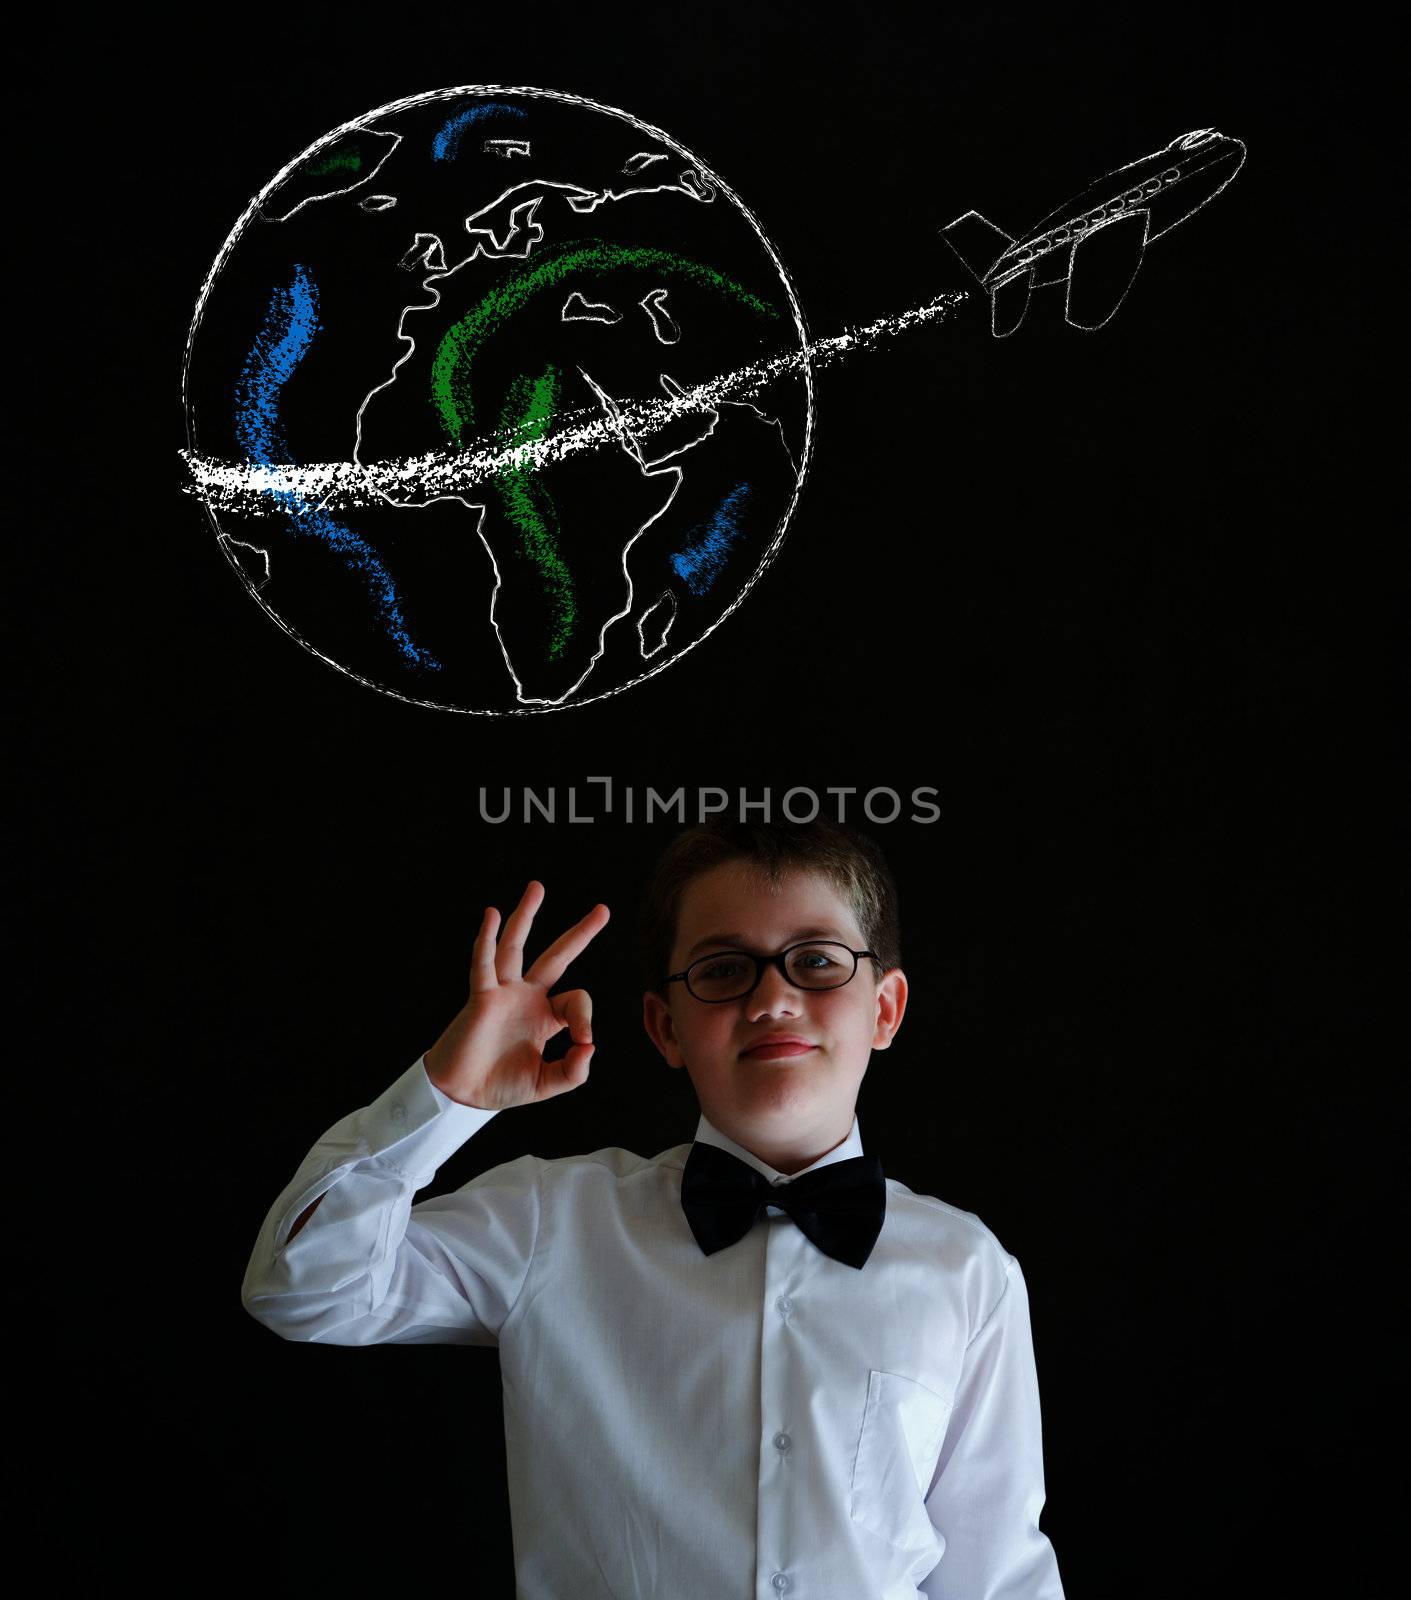 All ok boy dressed as business man with chalk globe and jet world travel on blackboard background by alistaircotton